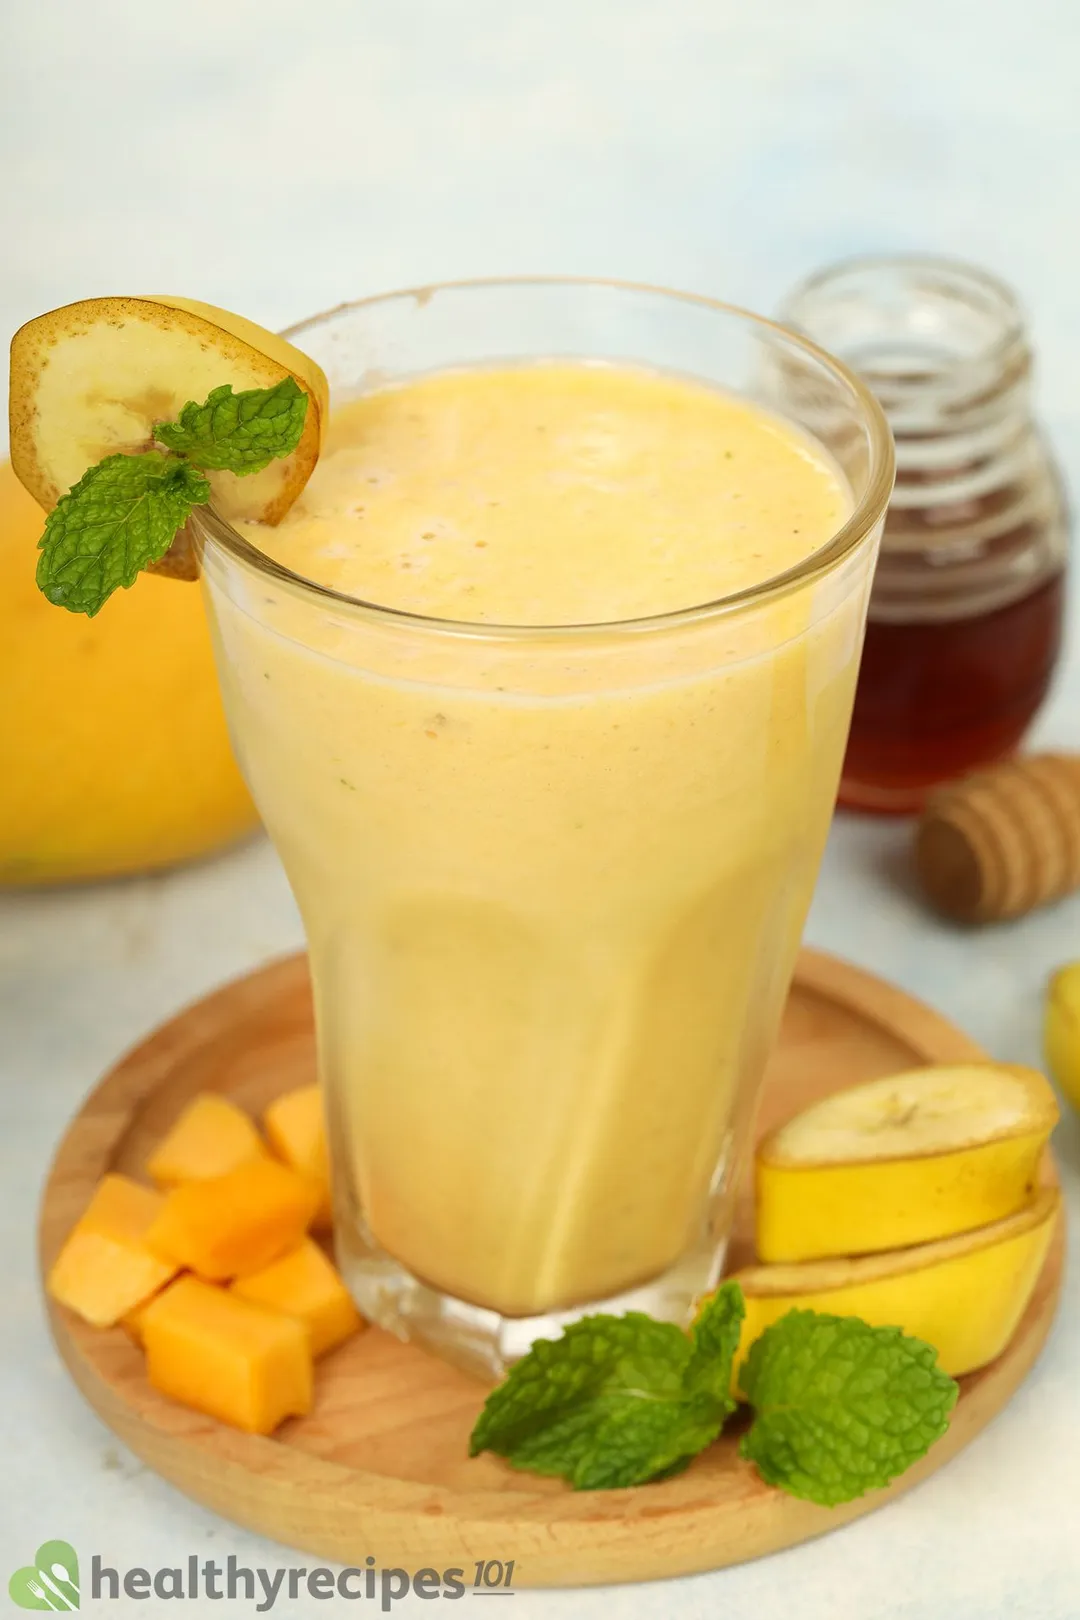 A glass of Mango Banana Smoothie placed on a wooden board with a scored mango, some bananas, and mint leaves.